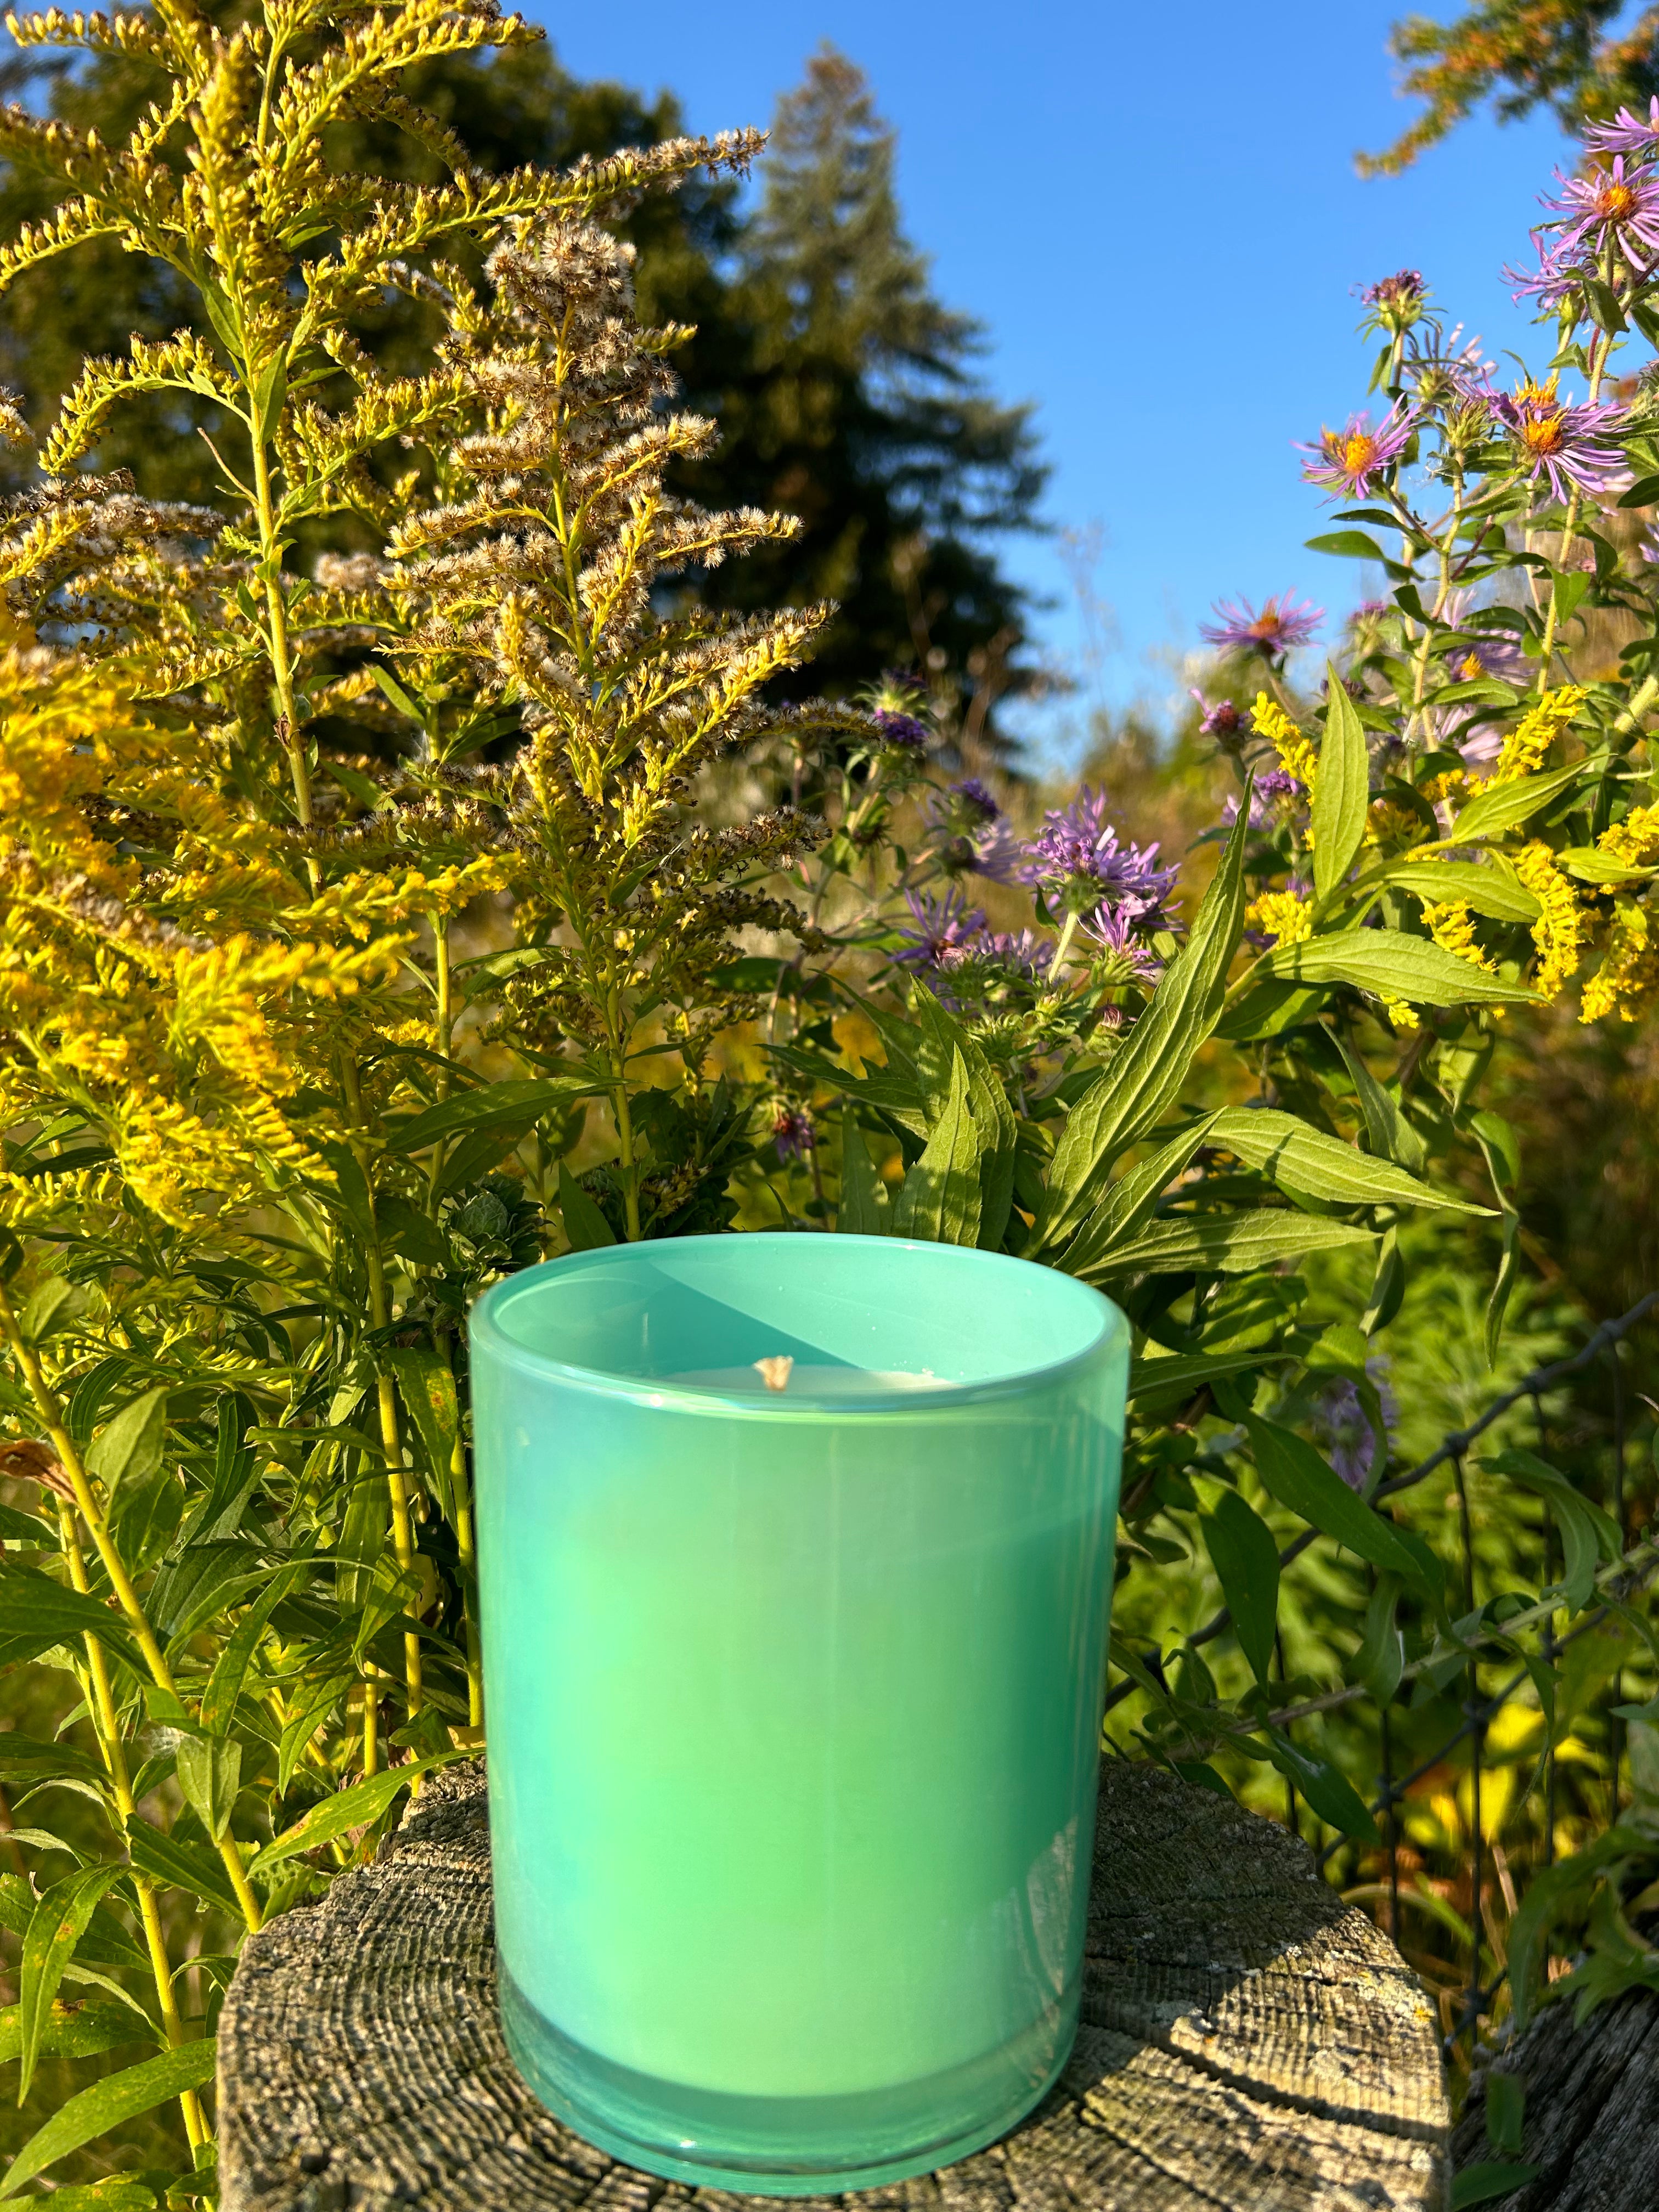 All Our Relations Special Edition - 10oz Soy Candle - LODGE Soy Candles